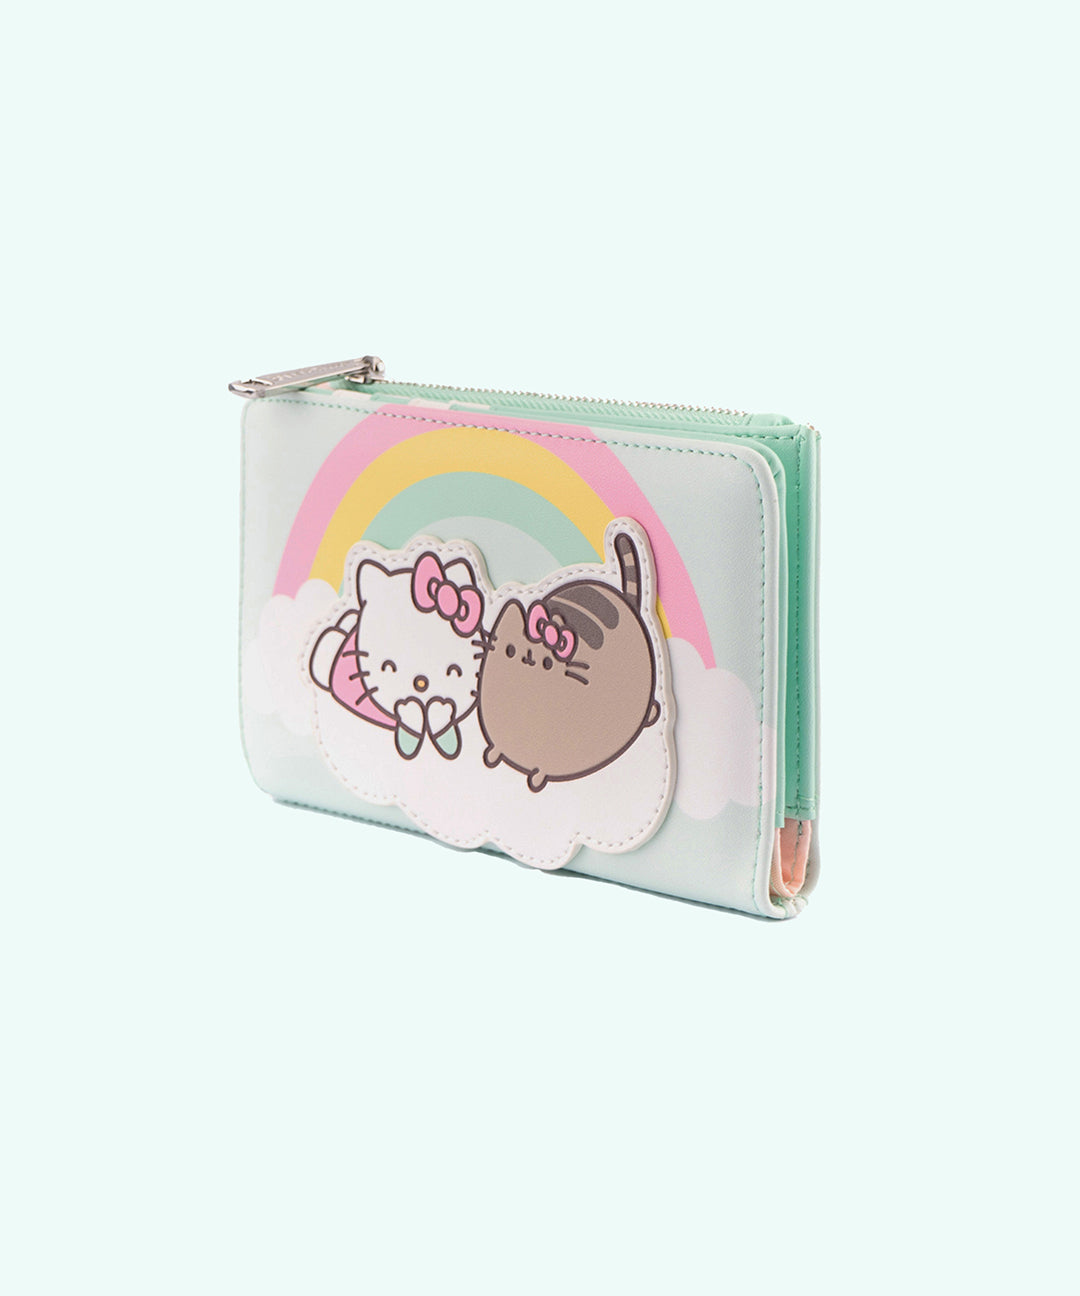 Brand New Hello Kitty Bag by Loungefly - Black & Pink - clothing